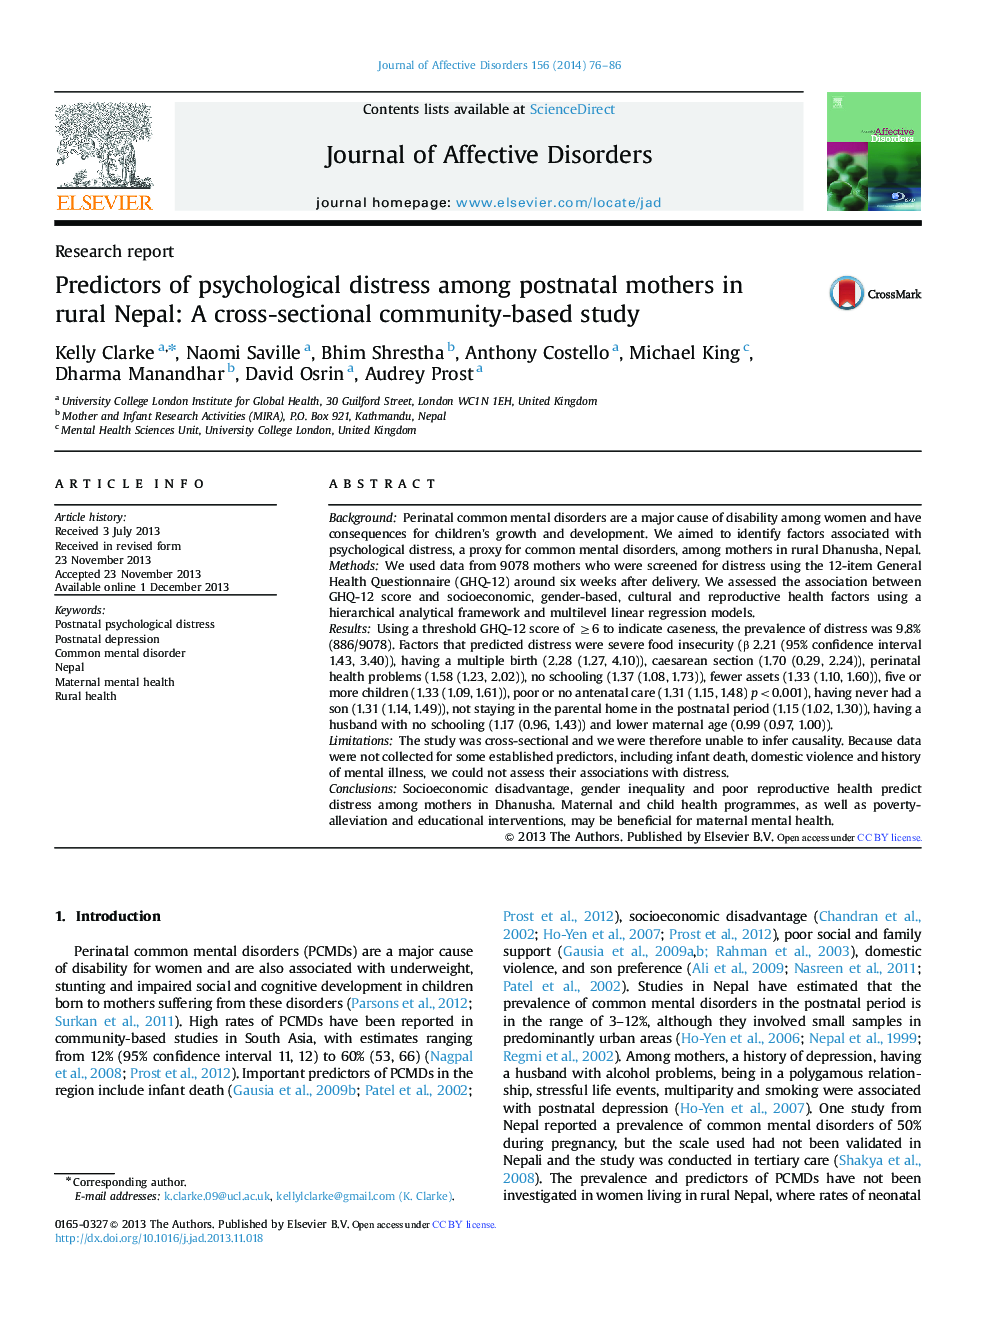 Predictors of psychological distress among postnatal mothers in rural Nepal: A cross-sectional community-based study